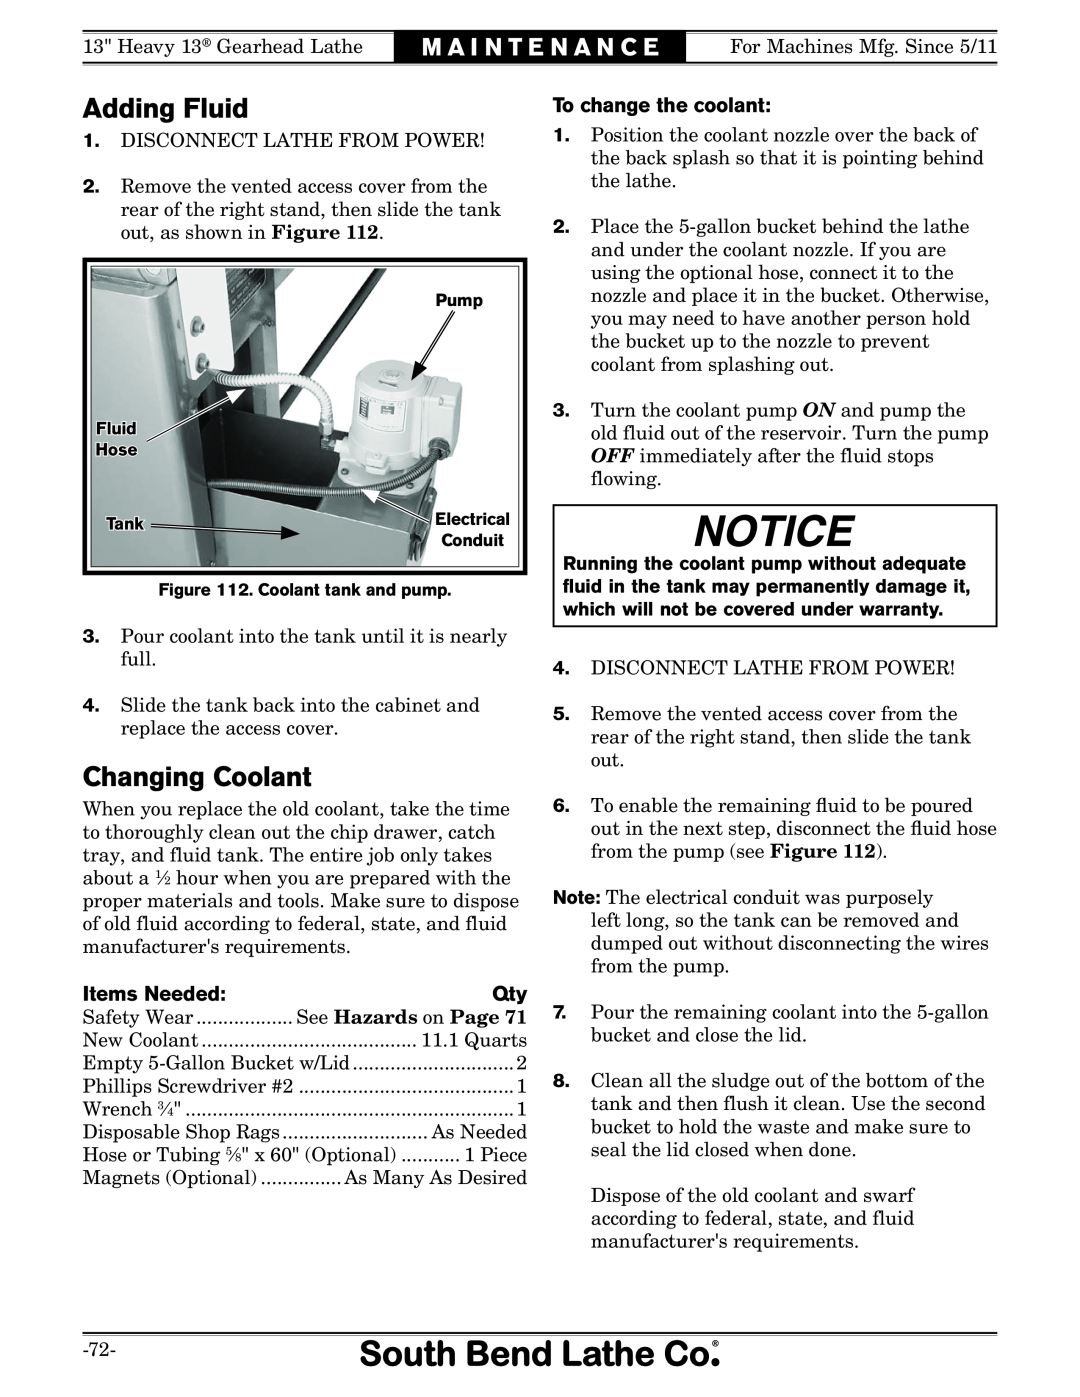 Southbend SB owner manual Adding Fluid, Changing Coolant, Items Needed, To change the coolant, See Hazards on Page 